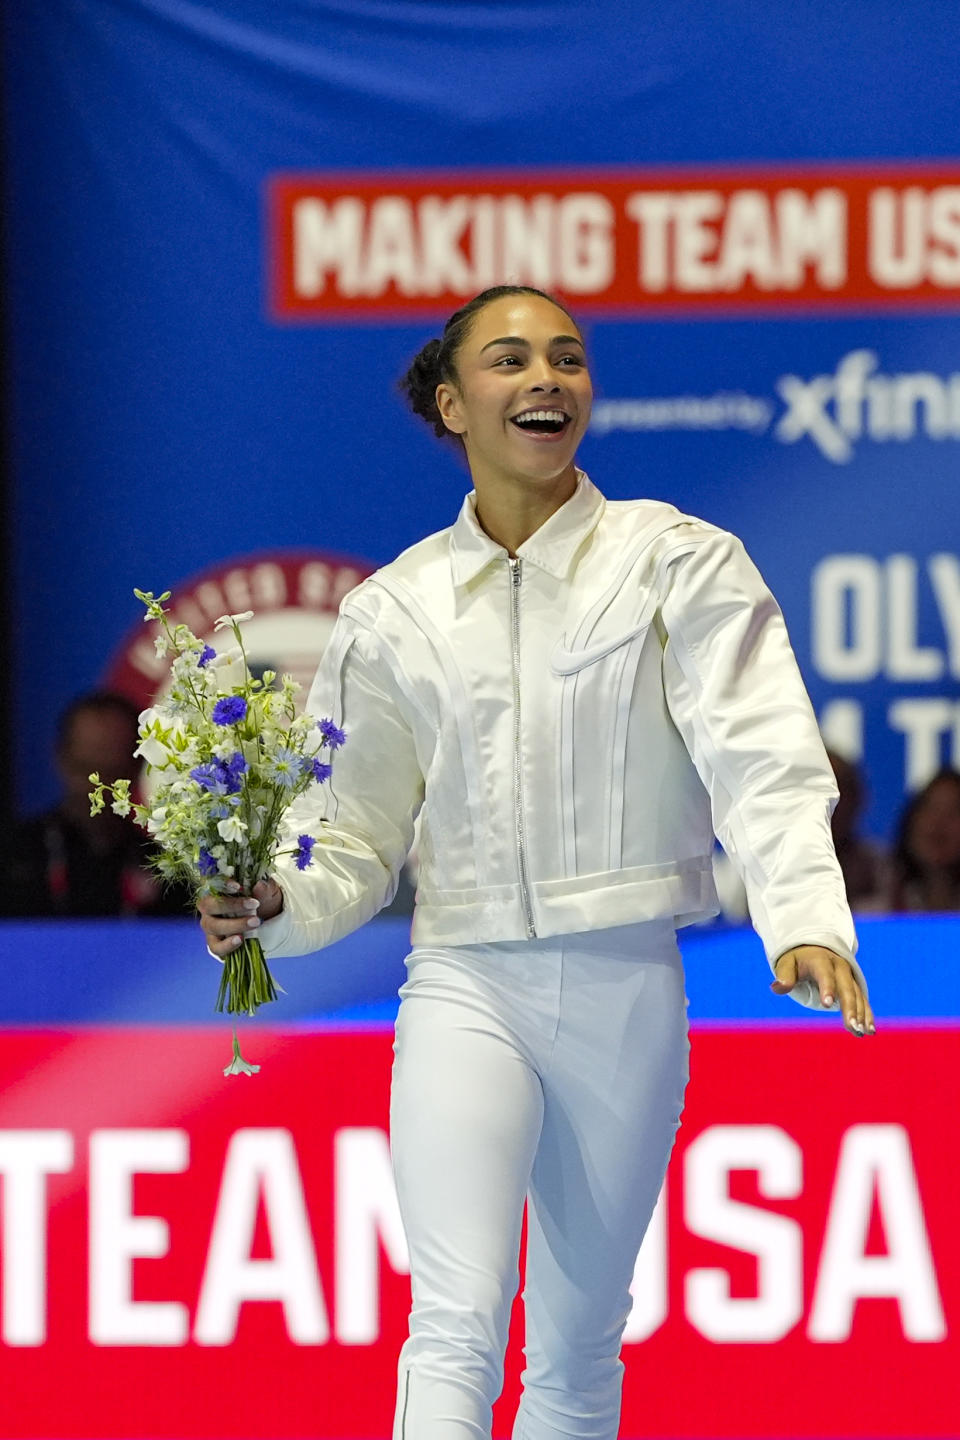 Hezly Rivera smiles as she is named to the 2024 Olympics team at the United States Gymnastics Olympic Trials on Sunday, June 30, 2024, in Minneapolis. (AP Photo/Abbie Parr)